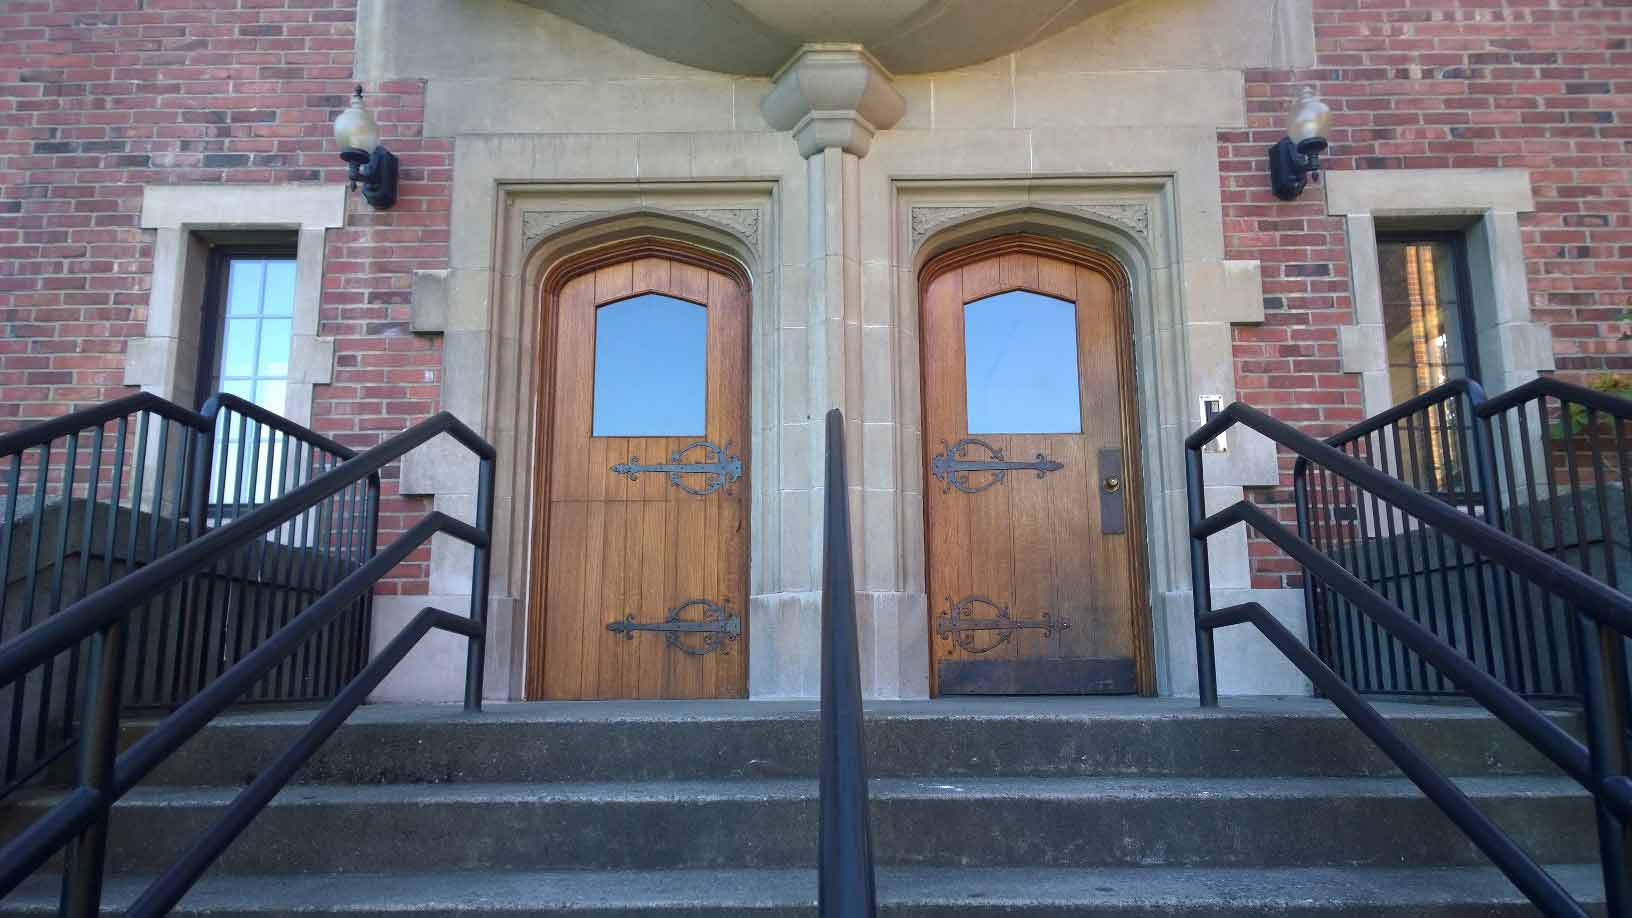 Doorways are literal as well as metaphorical at a universityPhoto: Morf Morford